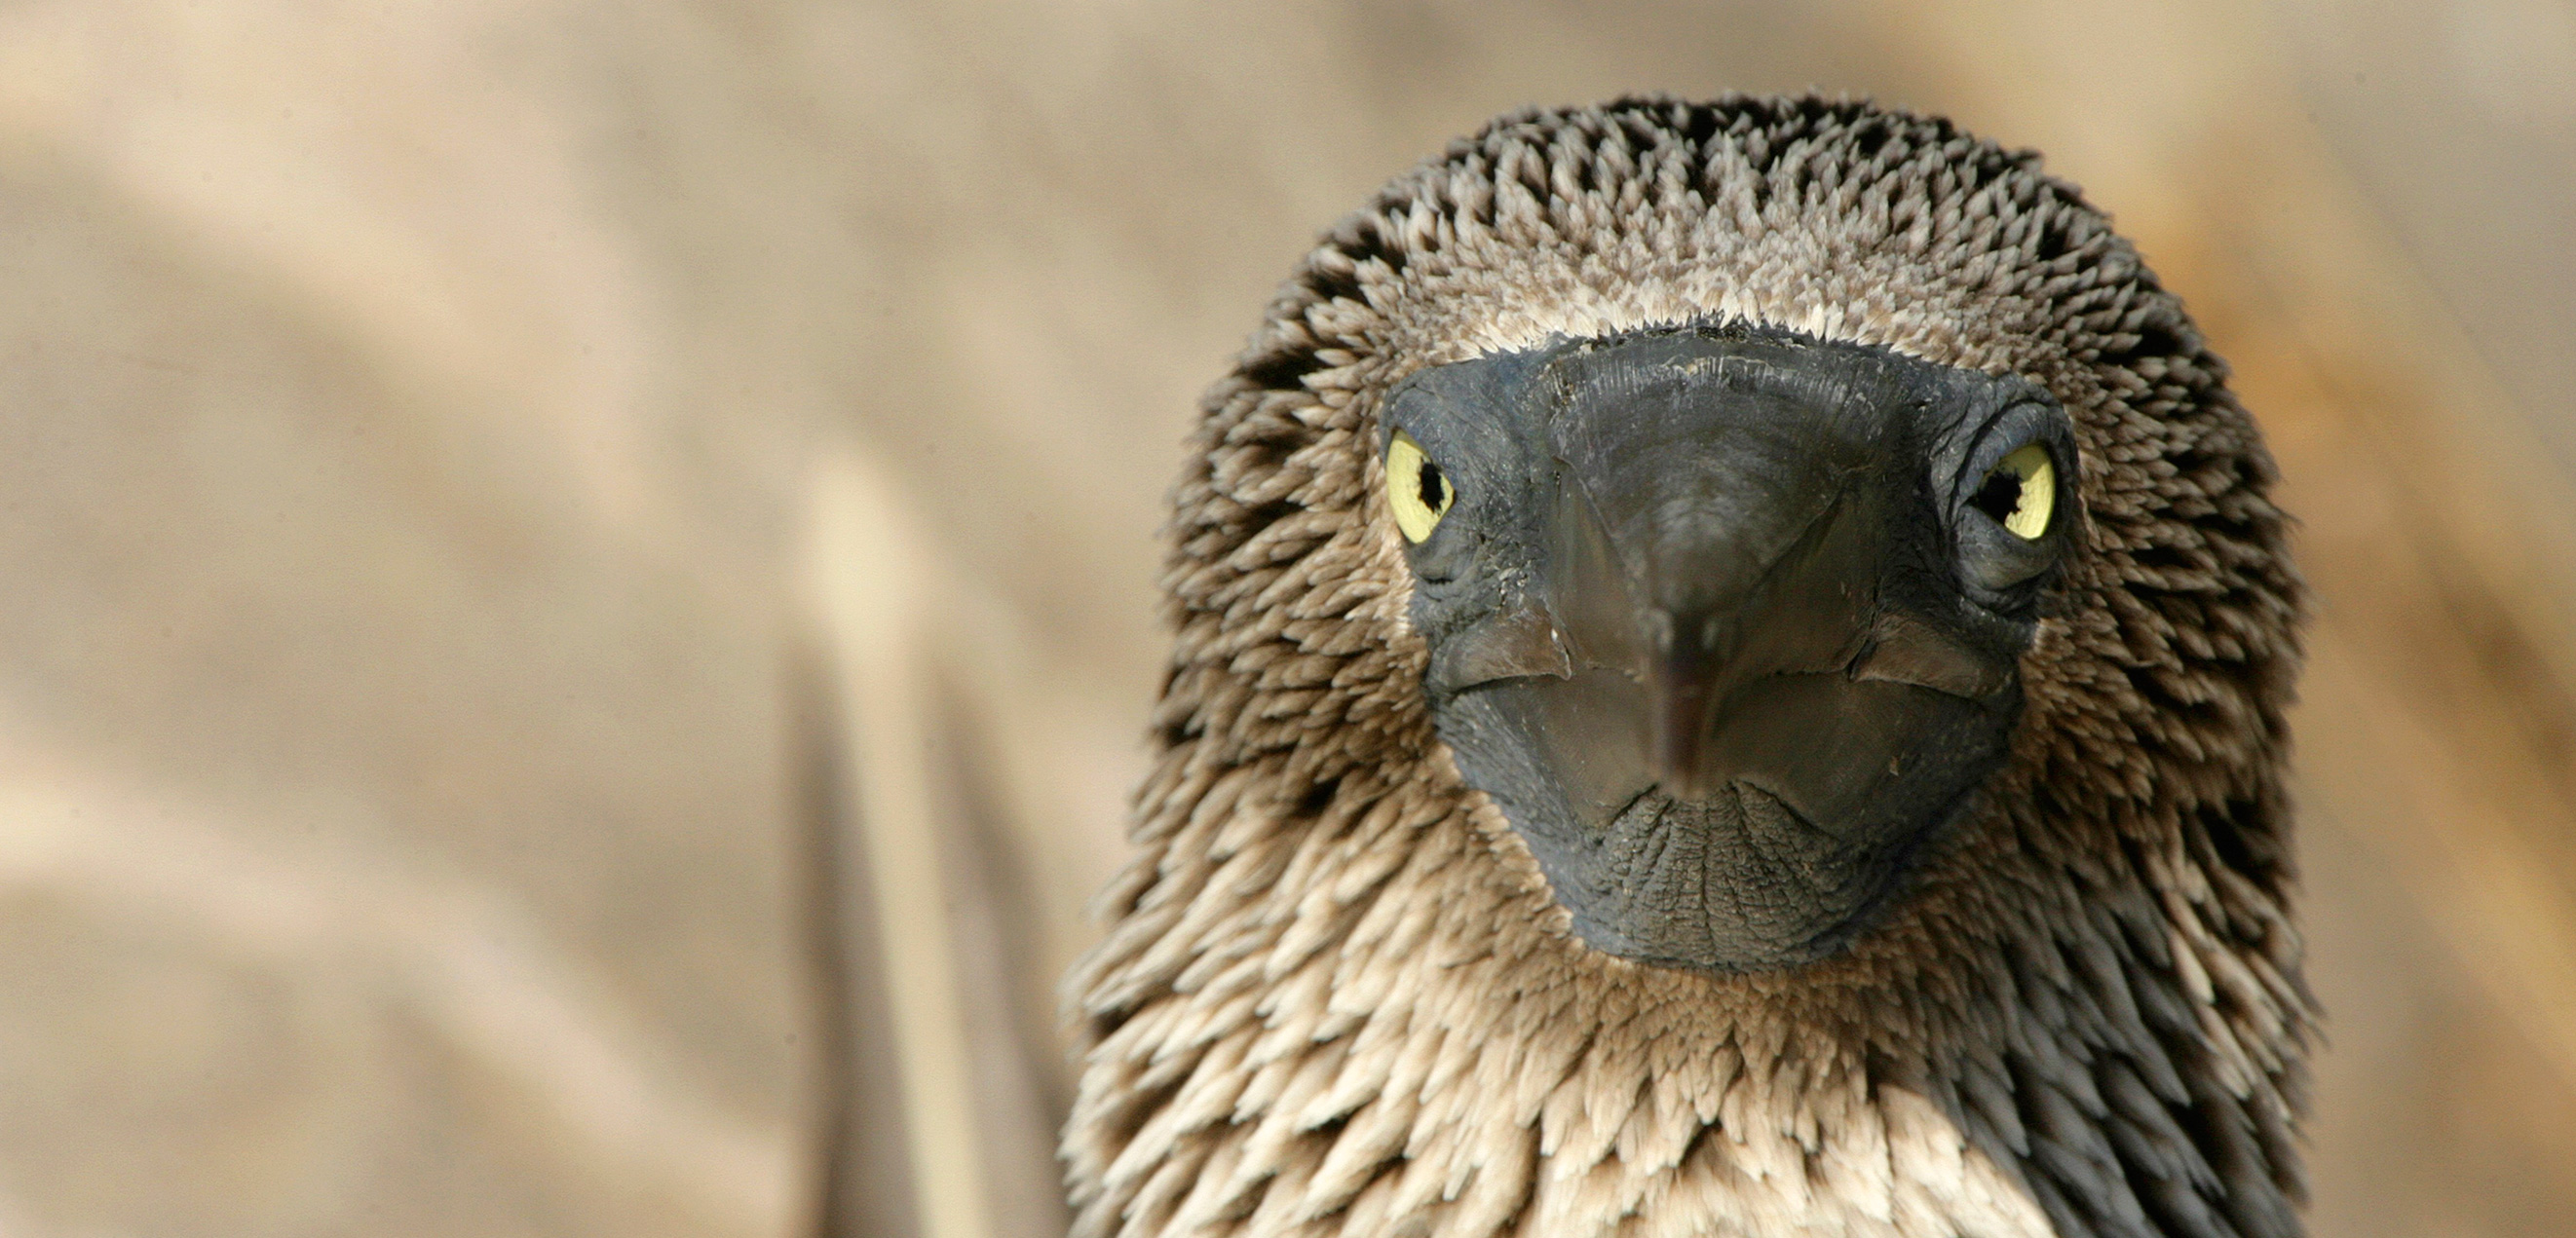 The blue-footed booby may seem comical on land, but it has a sinister side. Photo by David Fettes/Corbis